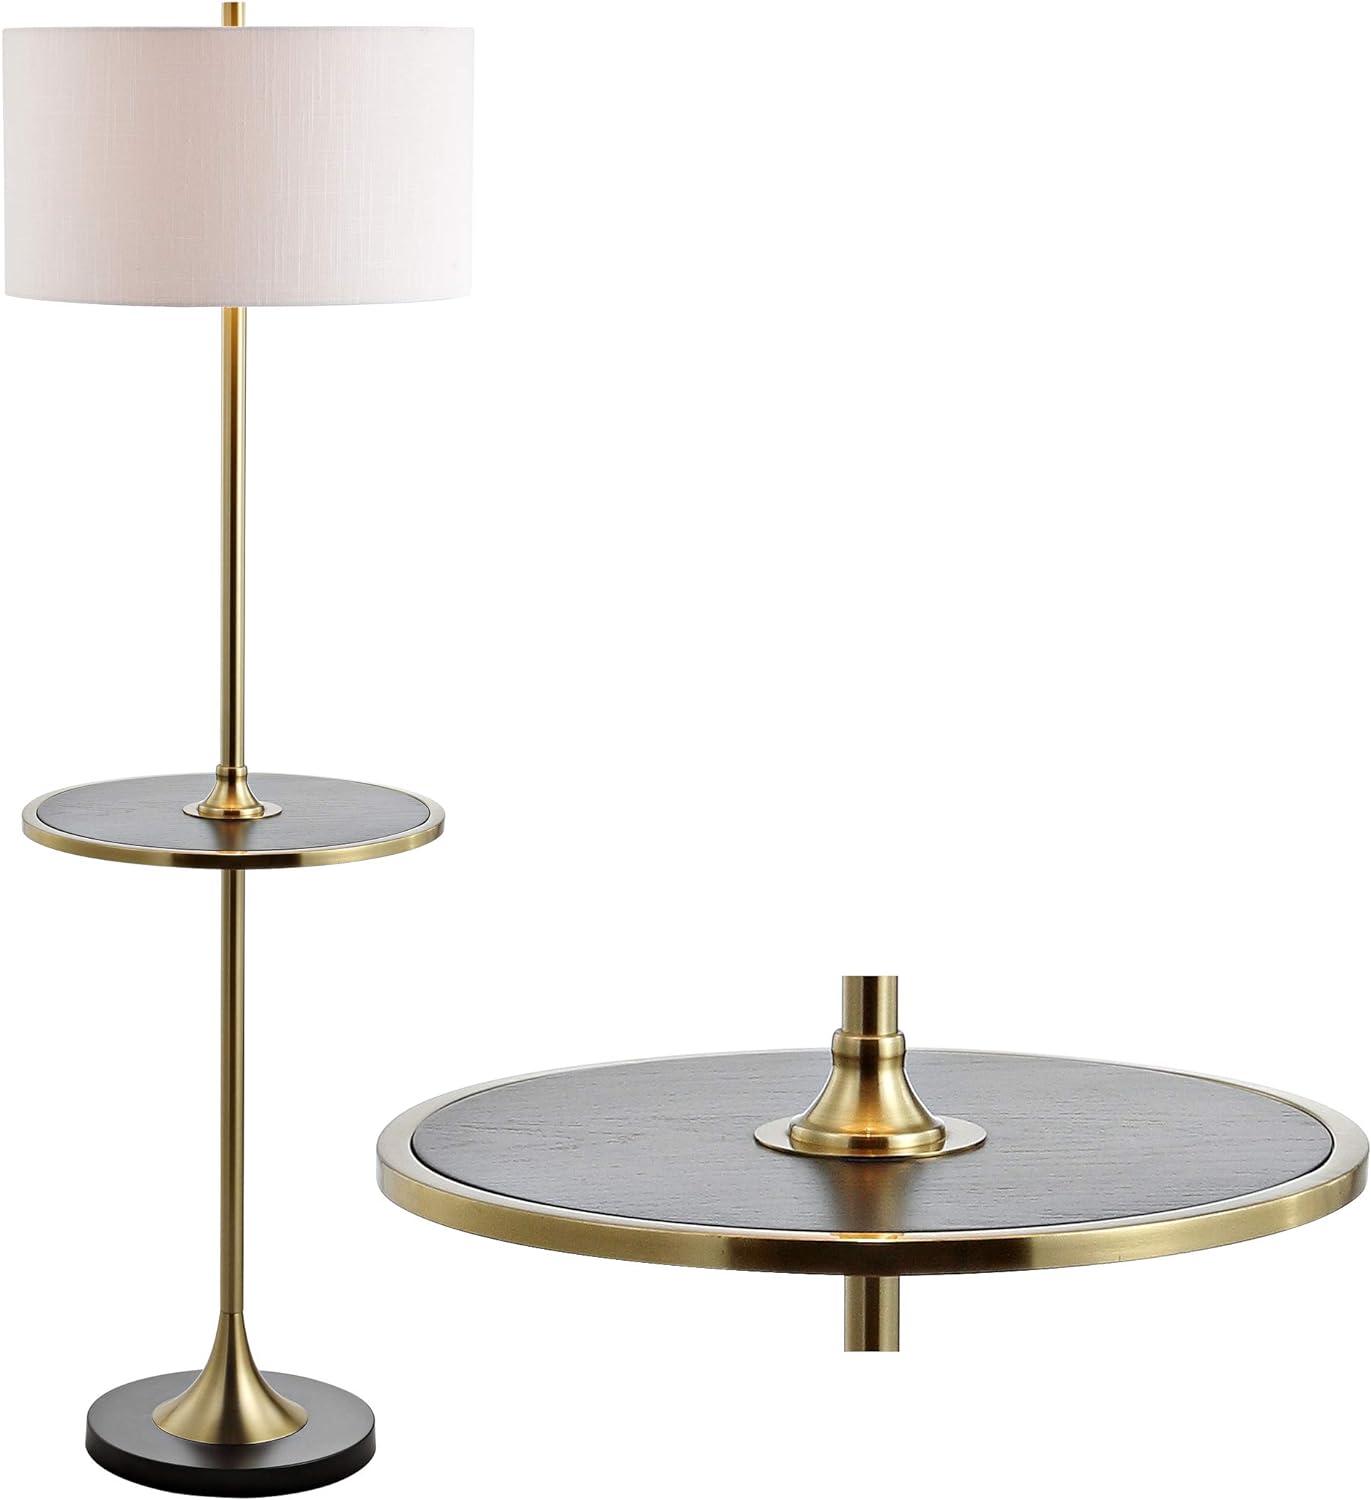 Transitional Black and Brass LED Floor Lamp with Integrated Wood Table